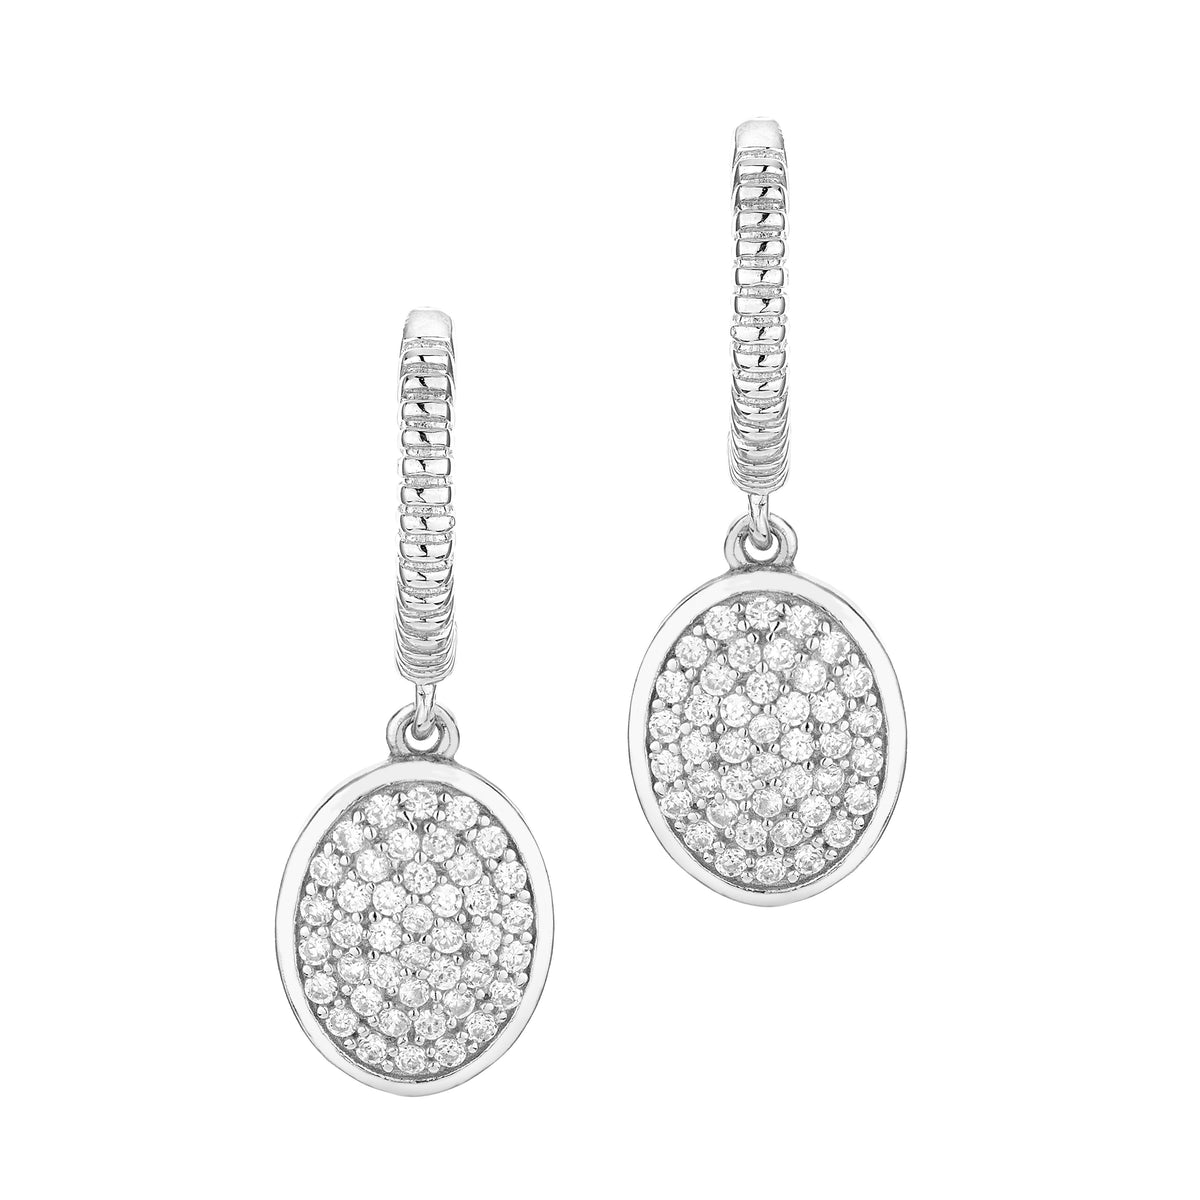 Oval Micro Pave Earrings in White